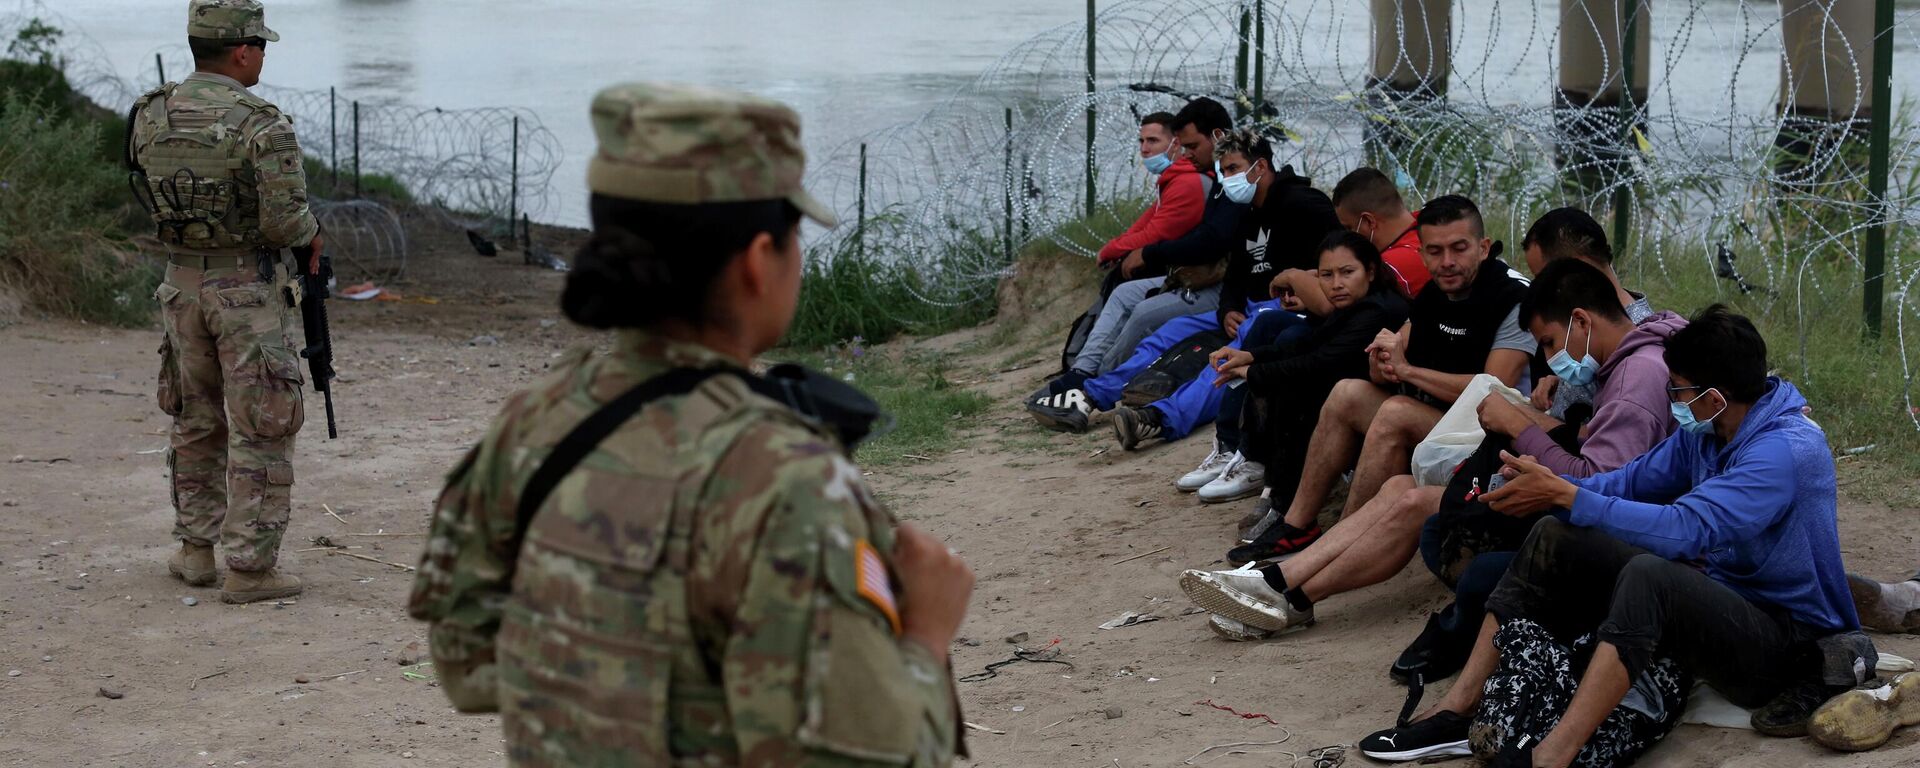 Migrants who had crossed the Rio Grande river into the U.S. are under custody of National Guard members as they await the arrival of U.S. Border Patrol agents in Eagle Pass, Texas, Friday, May 20, 2022 - Sputnik International, 1920, 22.12.2022